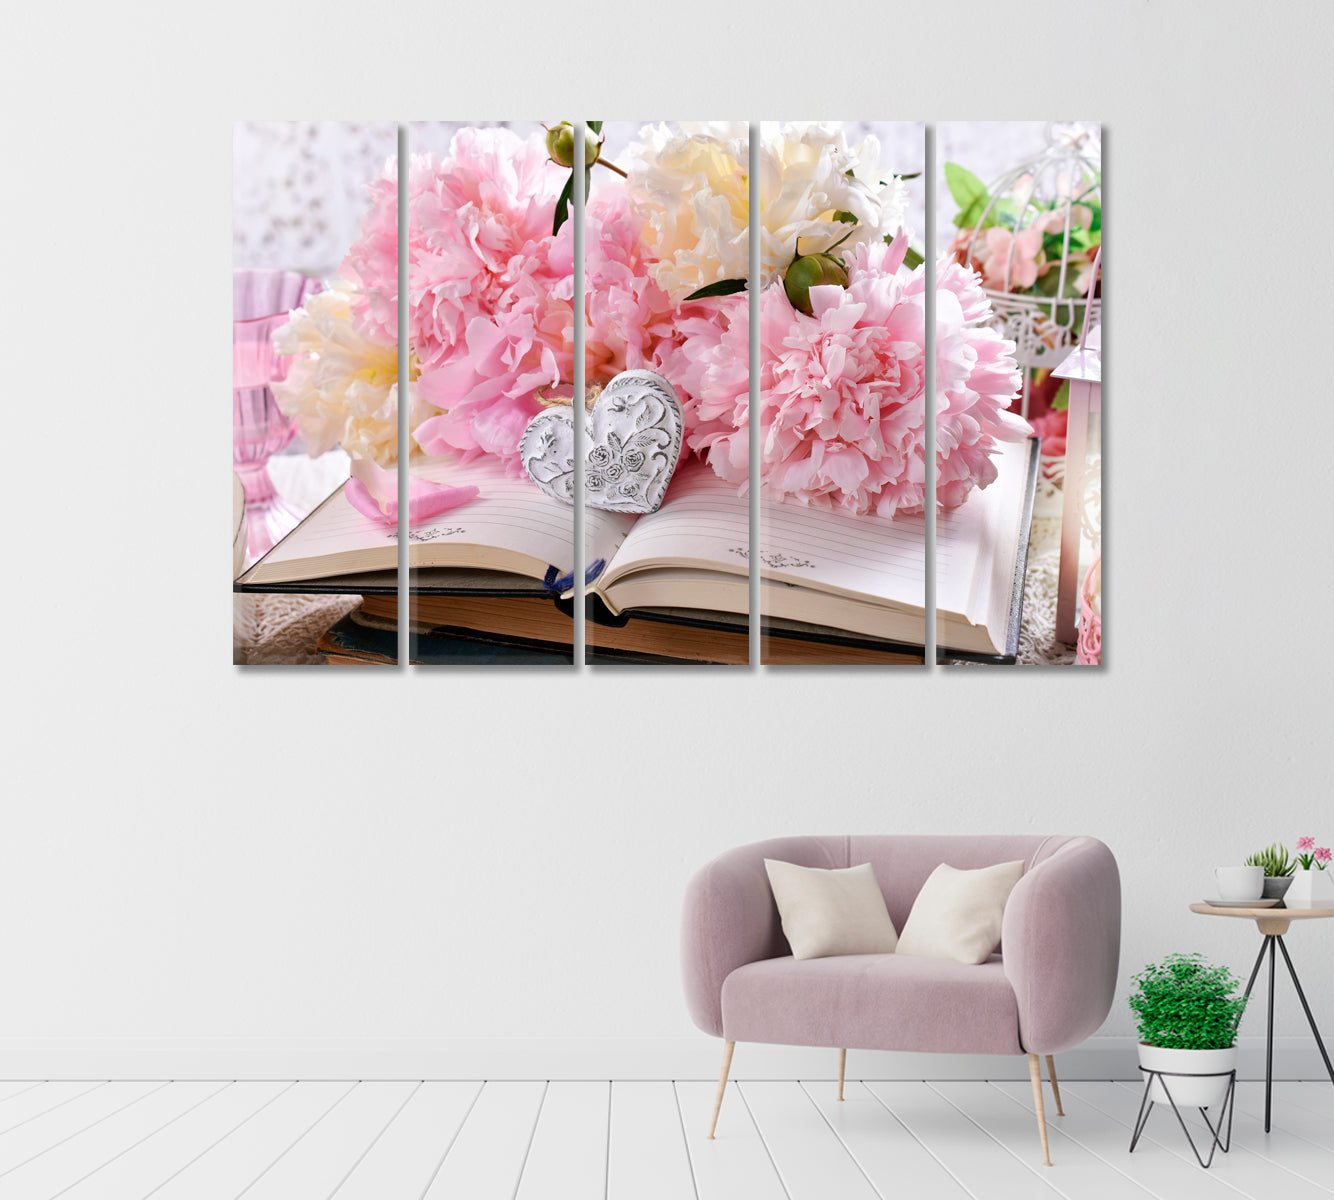 Beautiful Shabby Chic Style Pink Peonies and Old Books Canvas Print-Canvas Print-CetArt-1 Panel-24x16 inches-CetArt